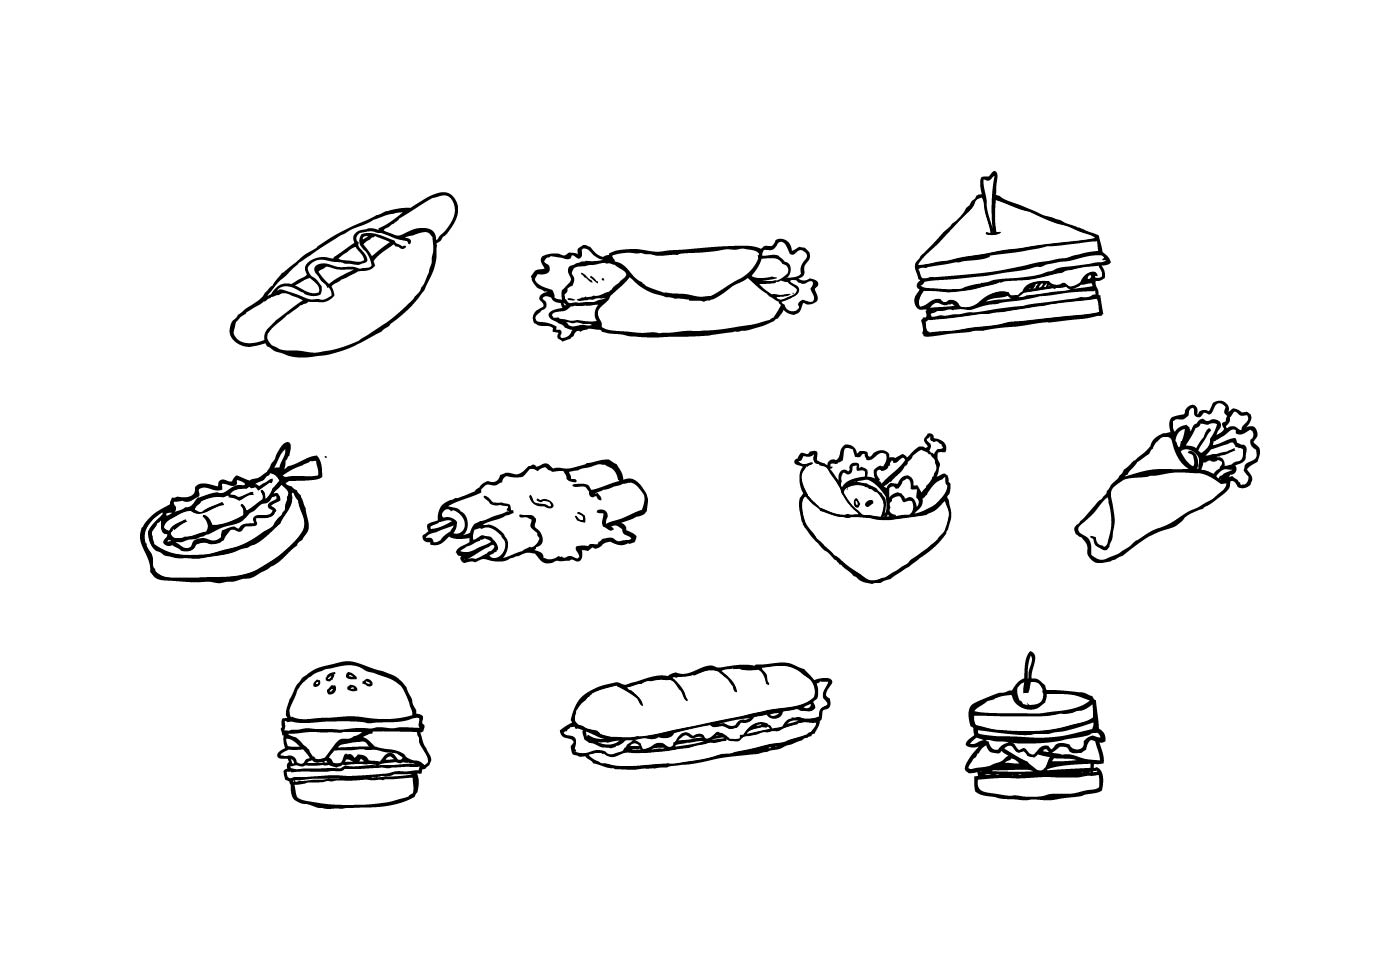 Download Free Sandwich Collection Sketch Vector - Download Free Vectors, Clipart Graphics & Vector Art